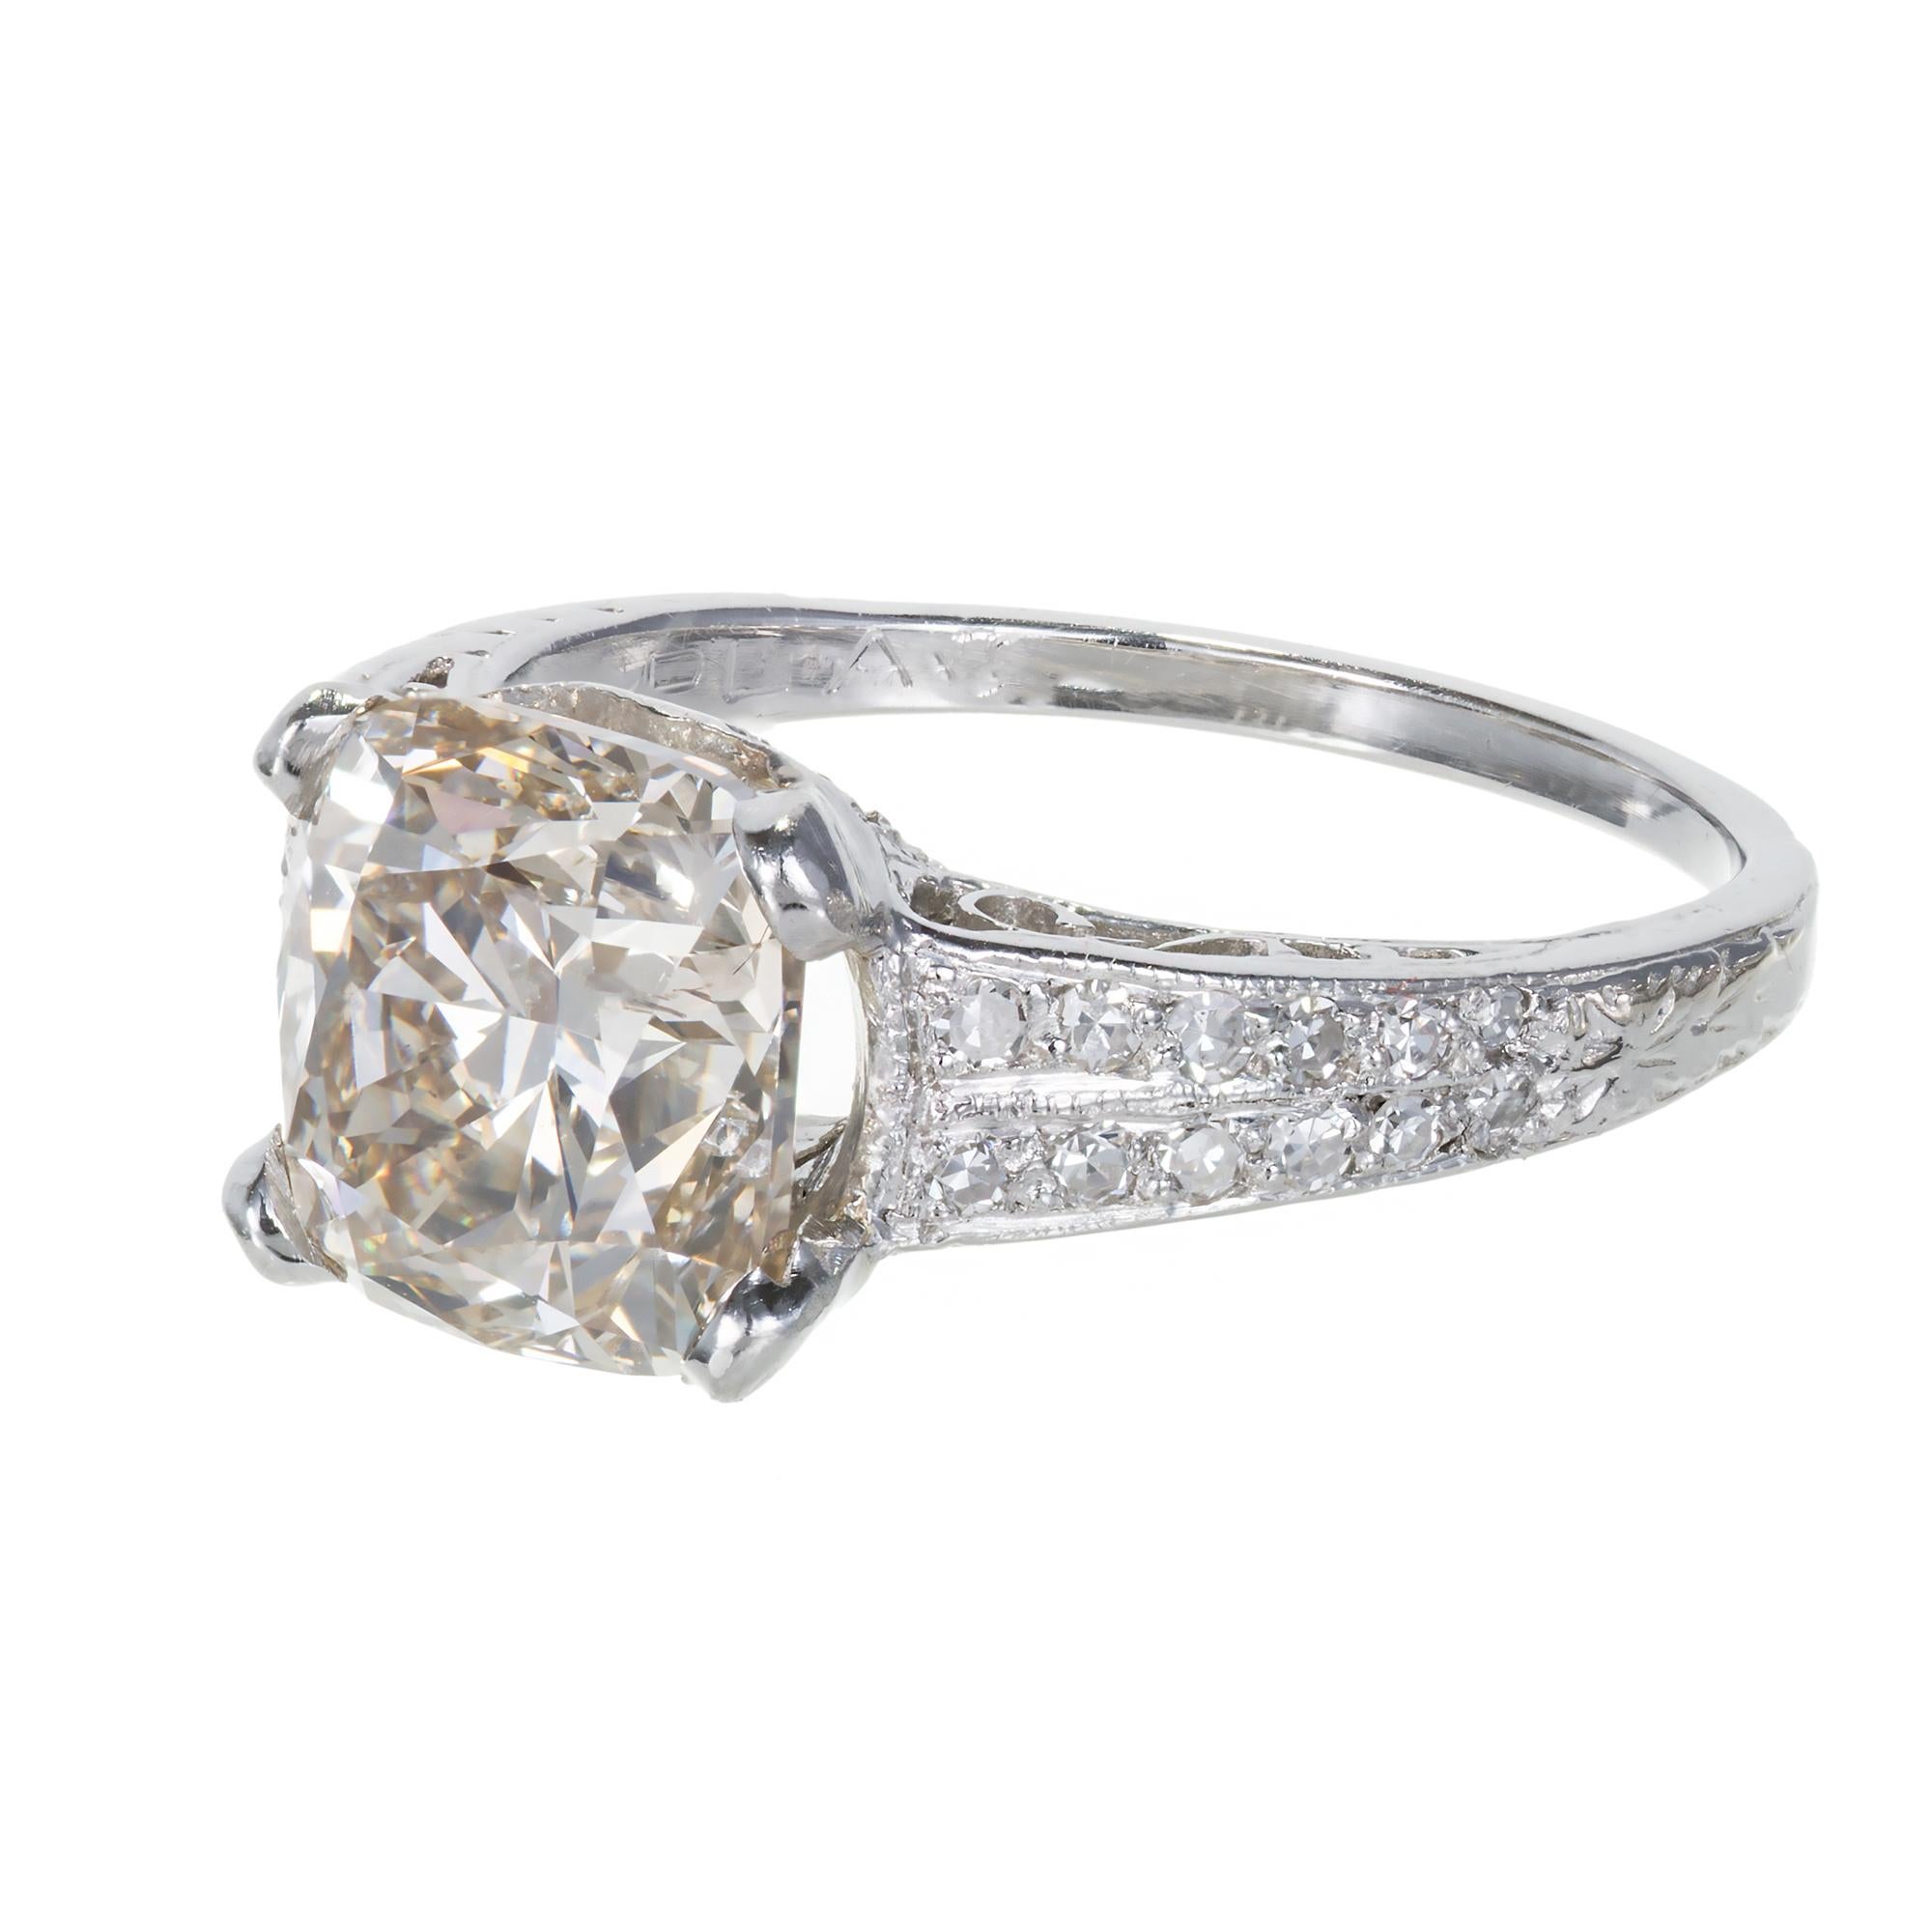 Art Deco diamond engagement ring. Natural light brown color with a unique pink overtone. Handmade original ring with side diamonds. GIA certificate #5131076311. 3.01ct antique cushion cut diamond. 20 single cut diamonds 0.25ct total. G, VS all pave